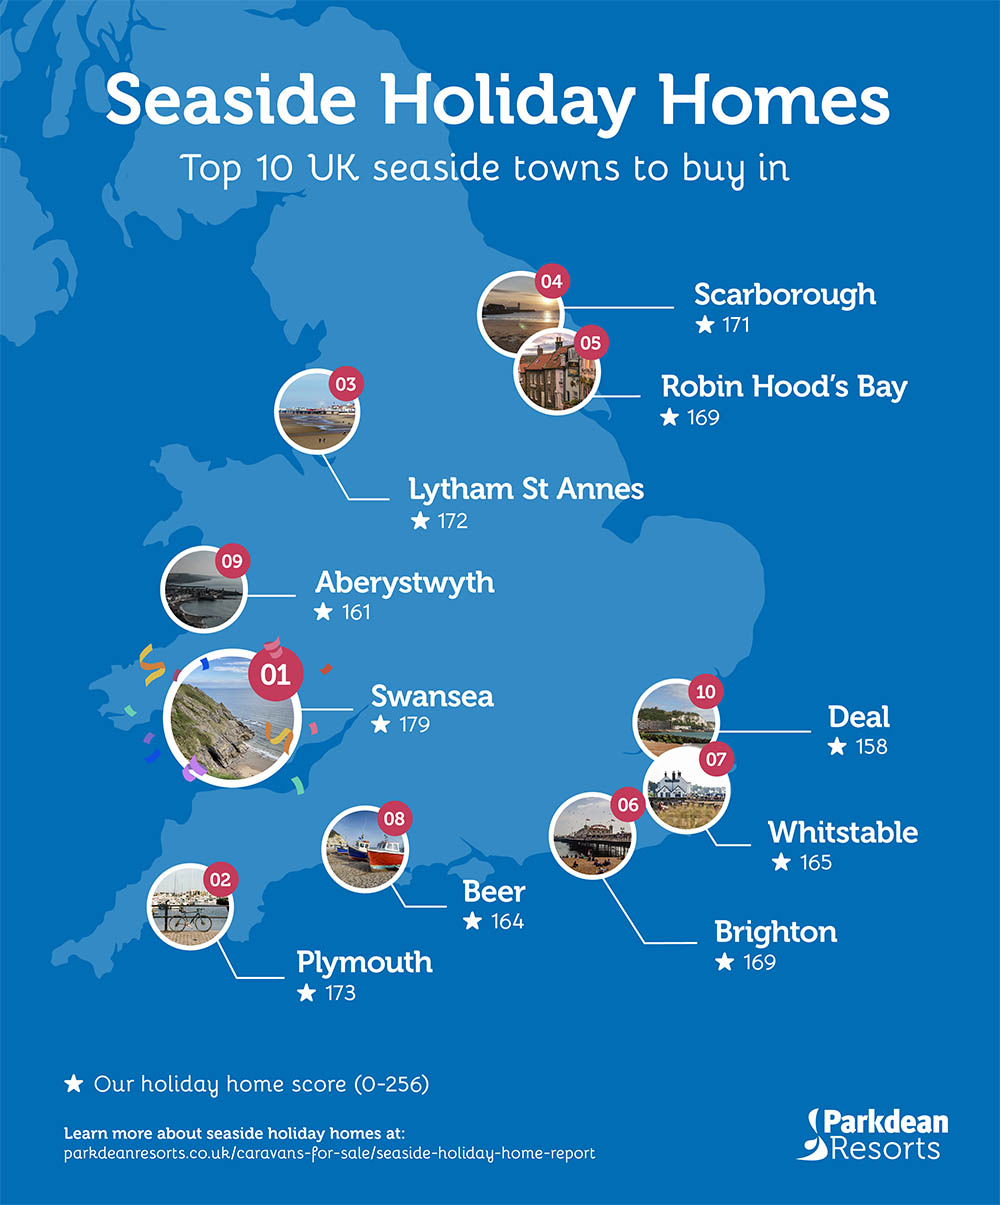 Map showing the top 10 coastal towns in the UK for holiday homes